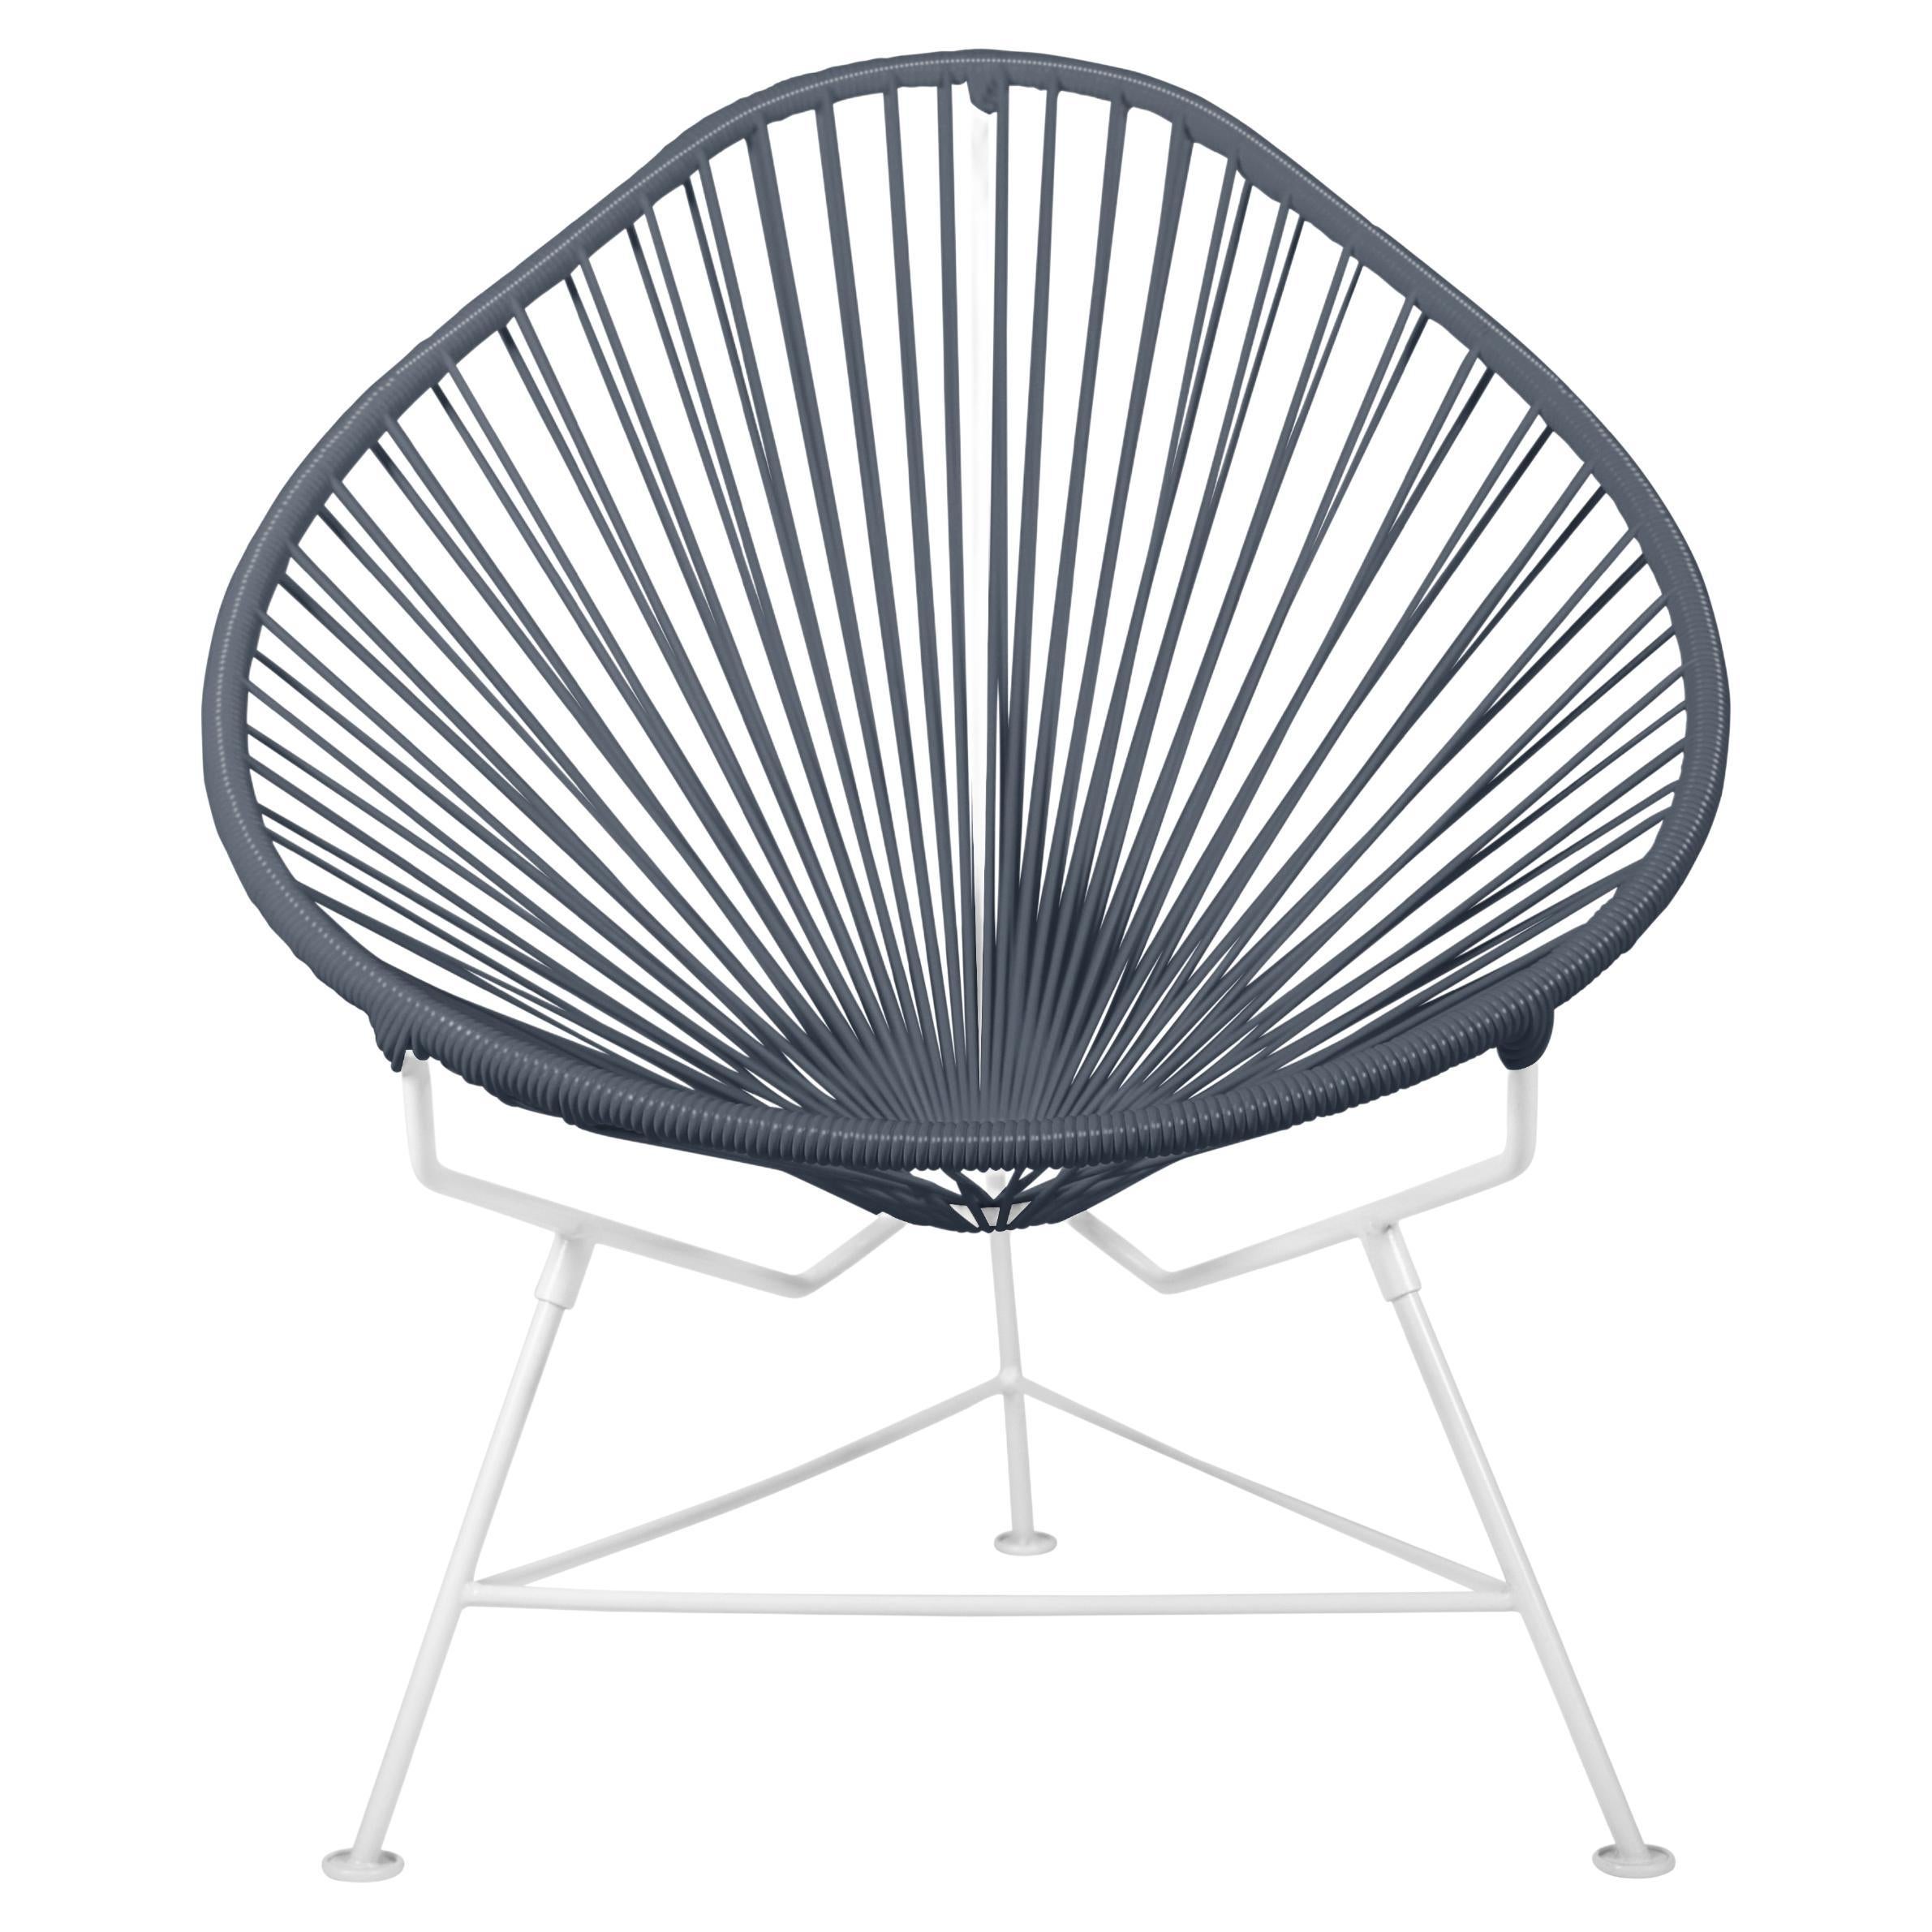 Innit Designs Acapulco Chair Grey Weave on White Frame